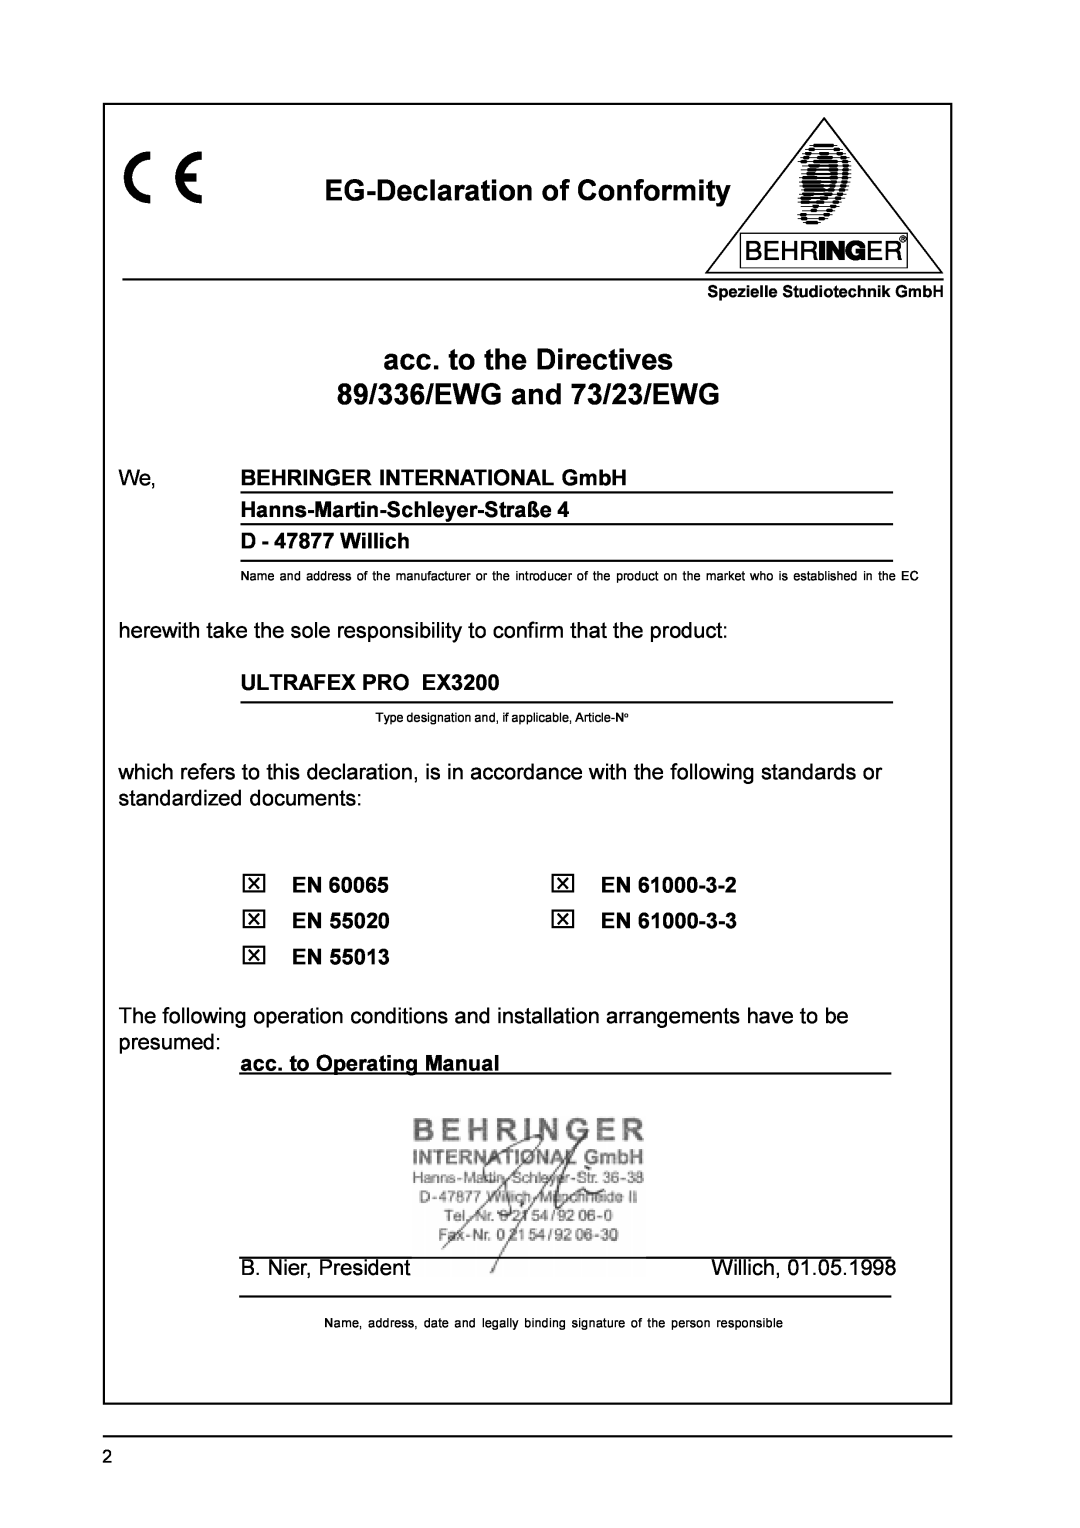 Behringer EX3200 user manual EG-Declarationof Conformity, acc. to the Directives 89/336/EWG and 73/23/EWG 